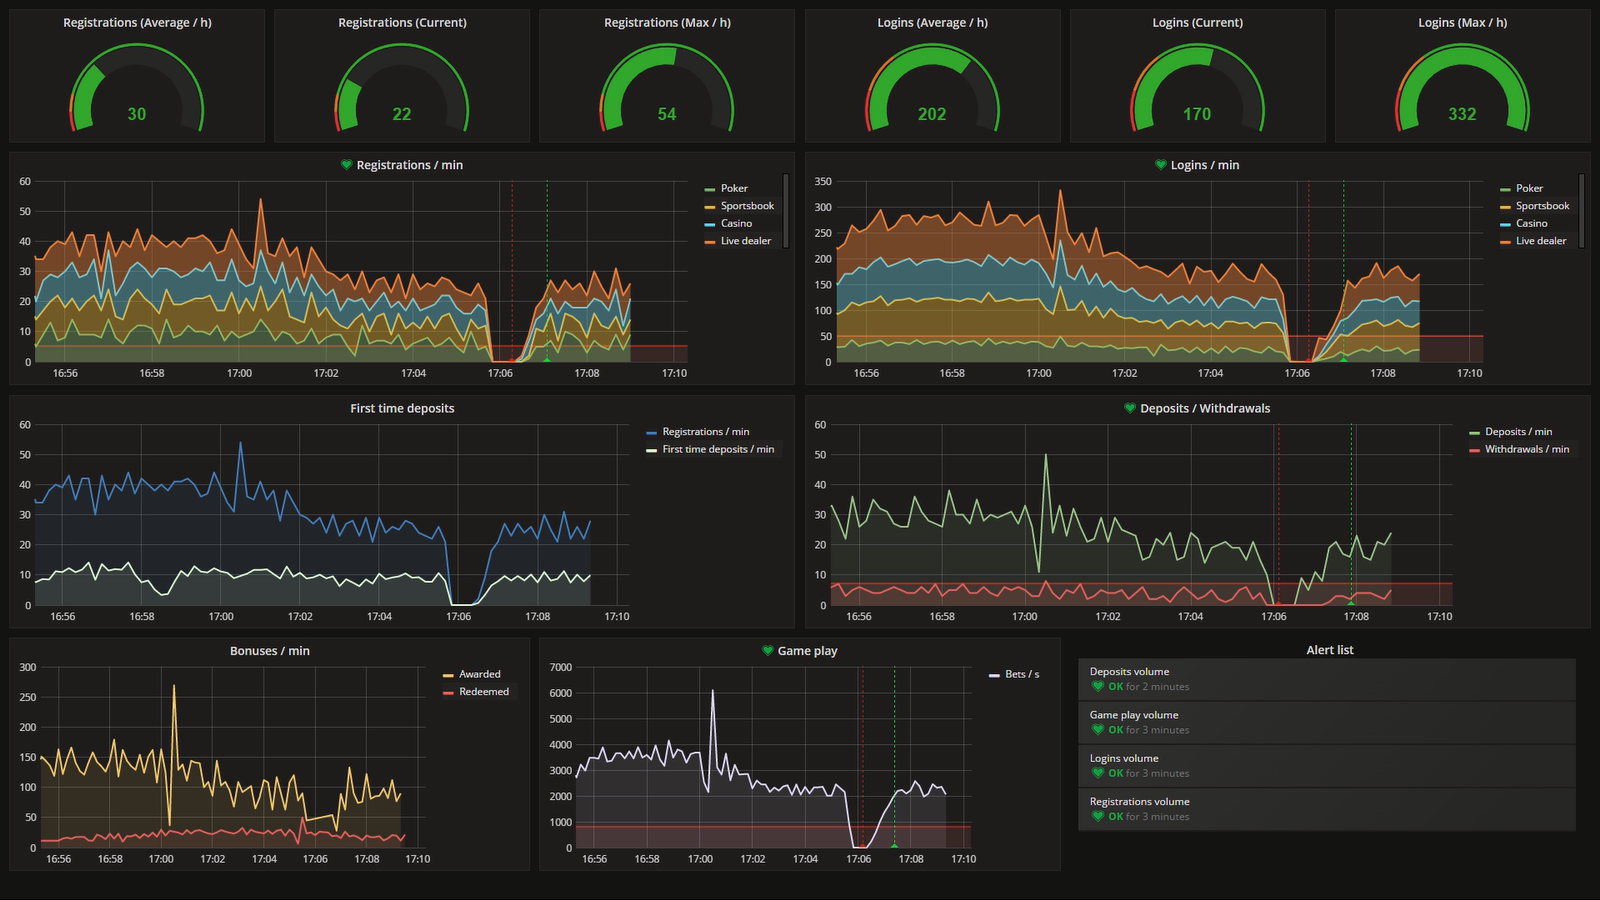 Dashboard with business continuity KPIs.